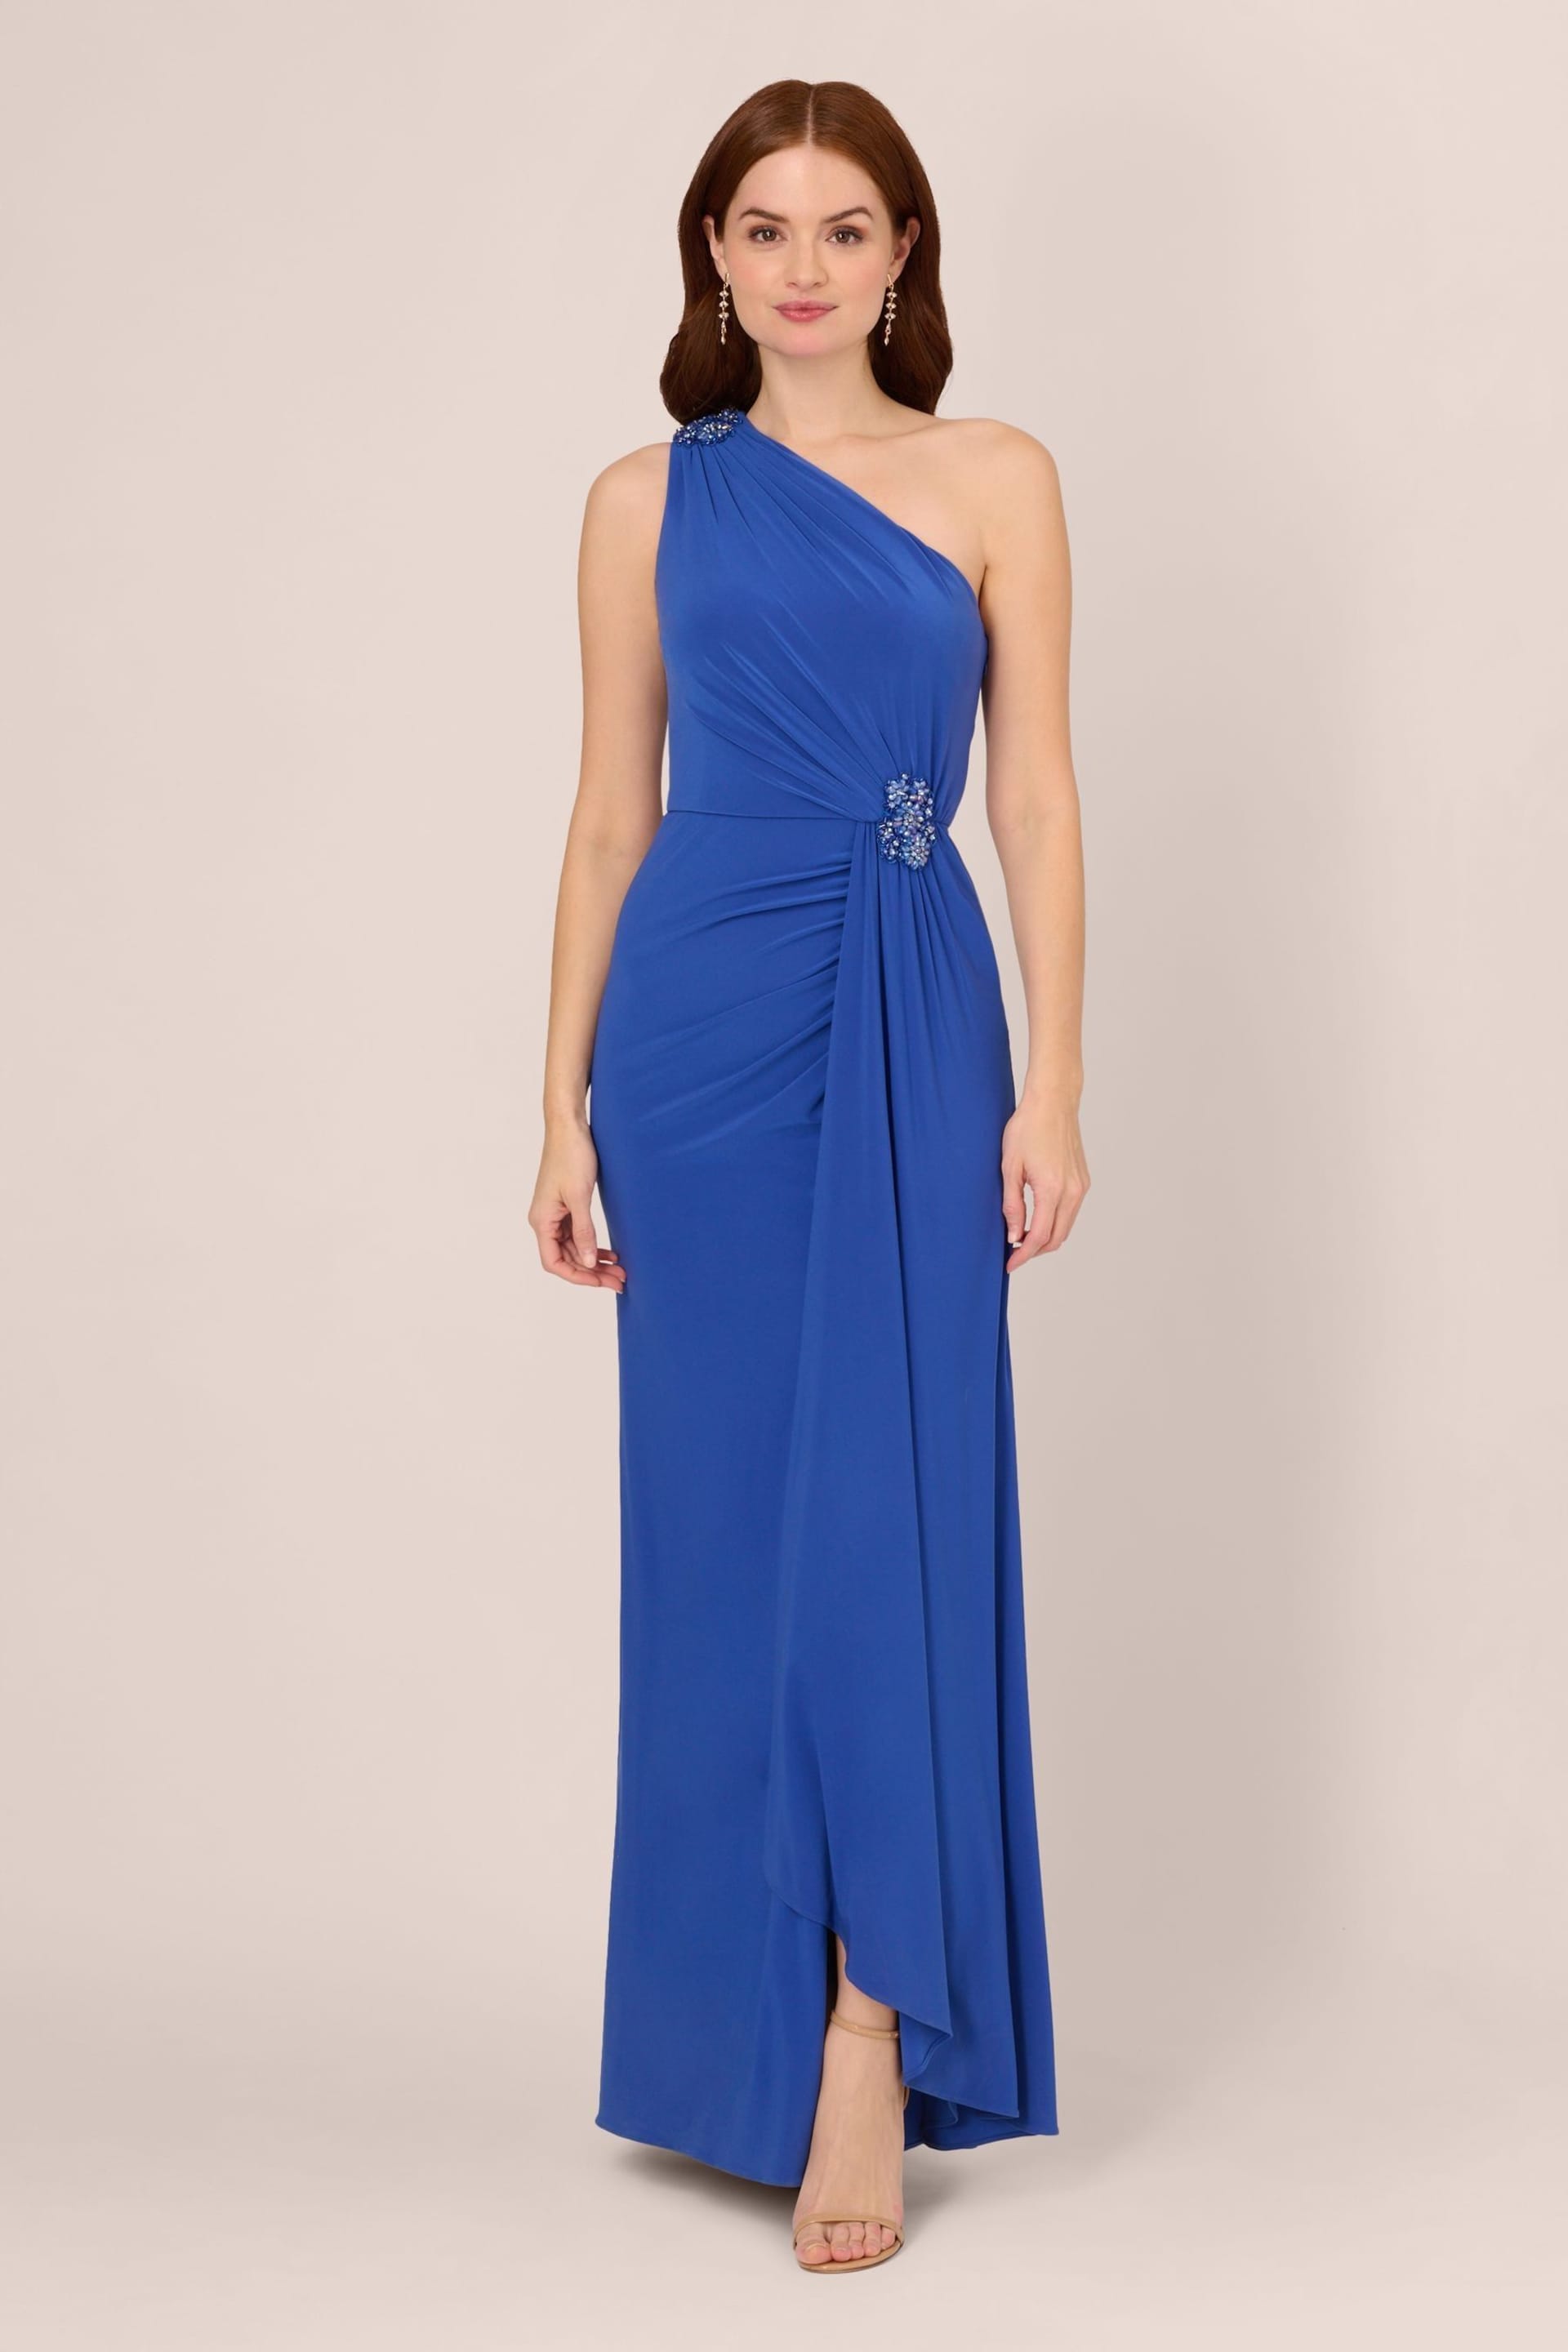 Adrianna Papell Blue Jersey Evening Gown - Image 1 of 7